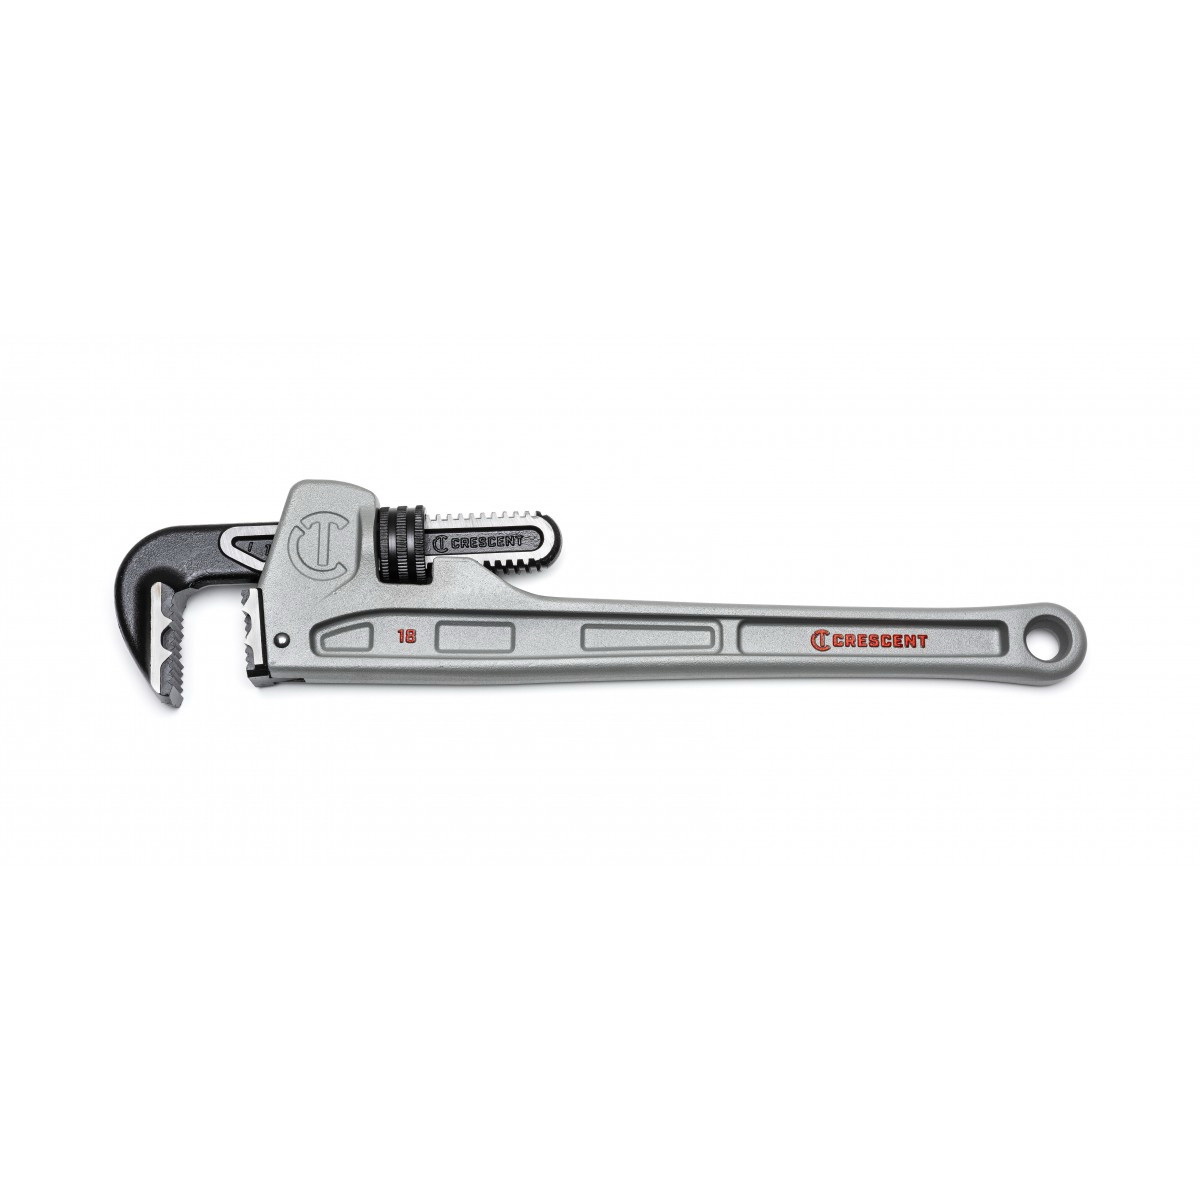 CAPW18 Pipe Wrench, 0 to 2-7/8 in Jaw, 18 in L, Aluminum, Powder-Coated